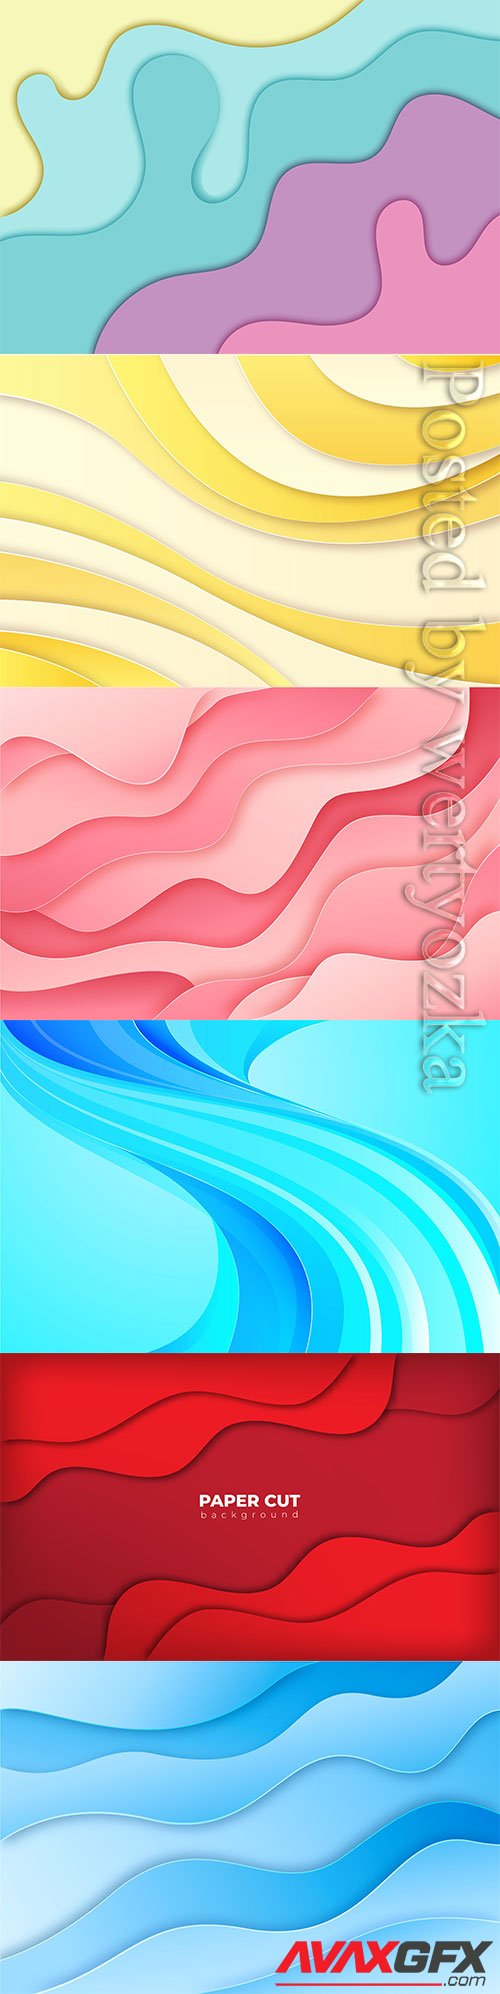 Abstract backgrounds with lines and waves design in vector